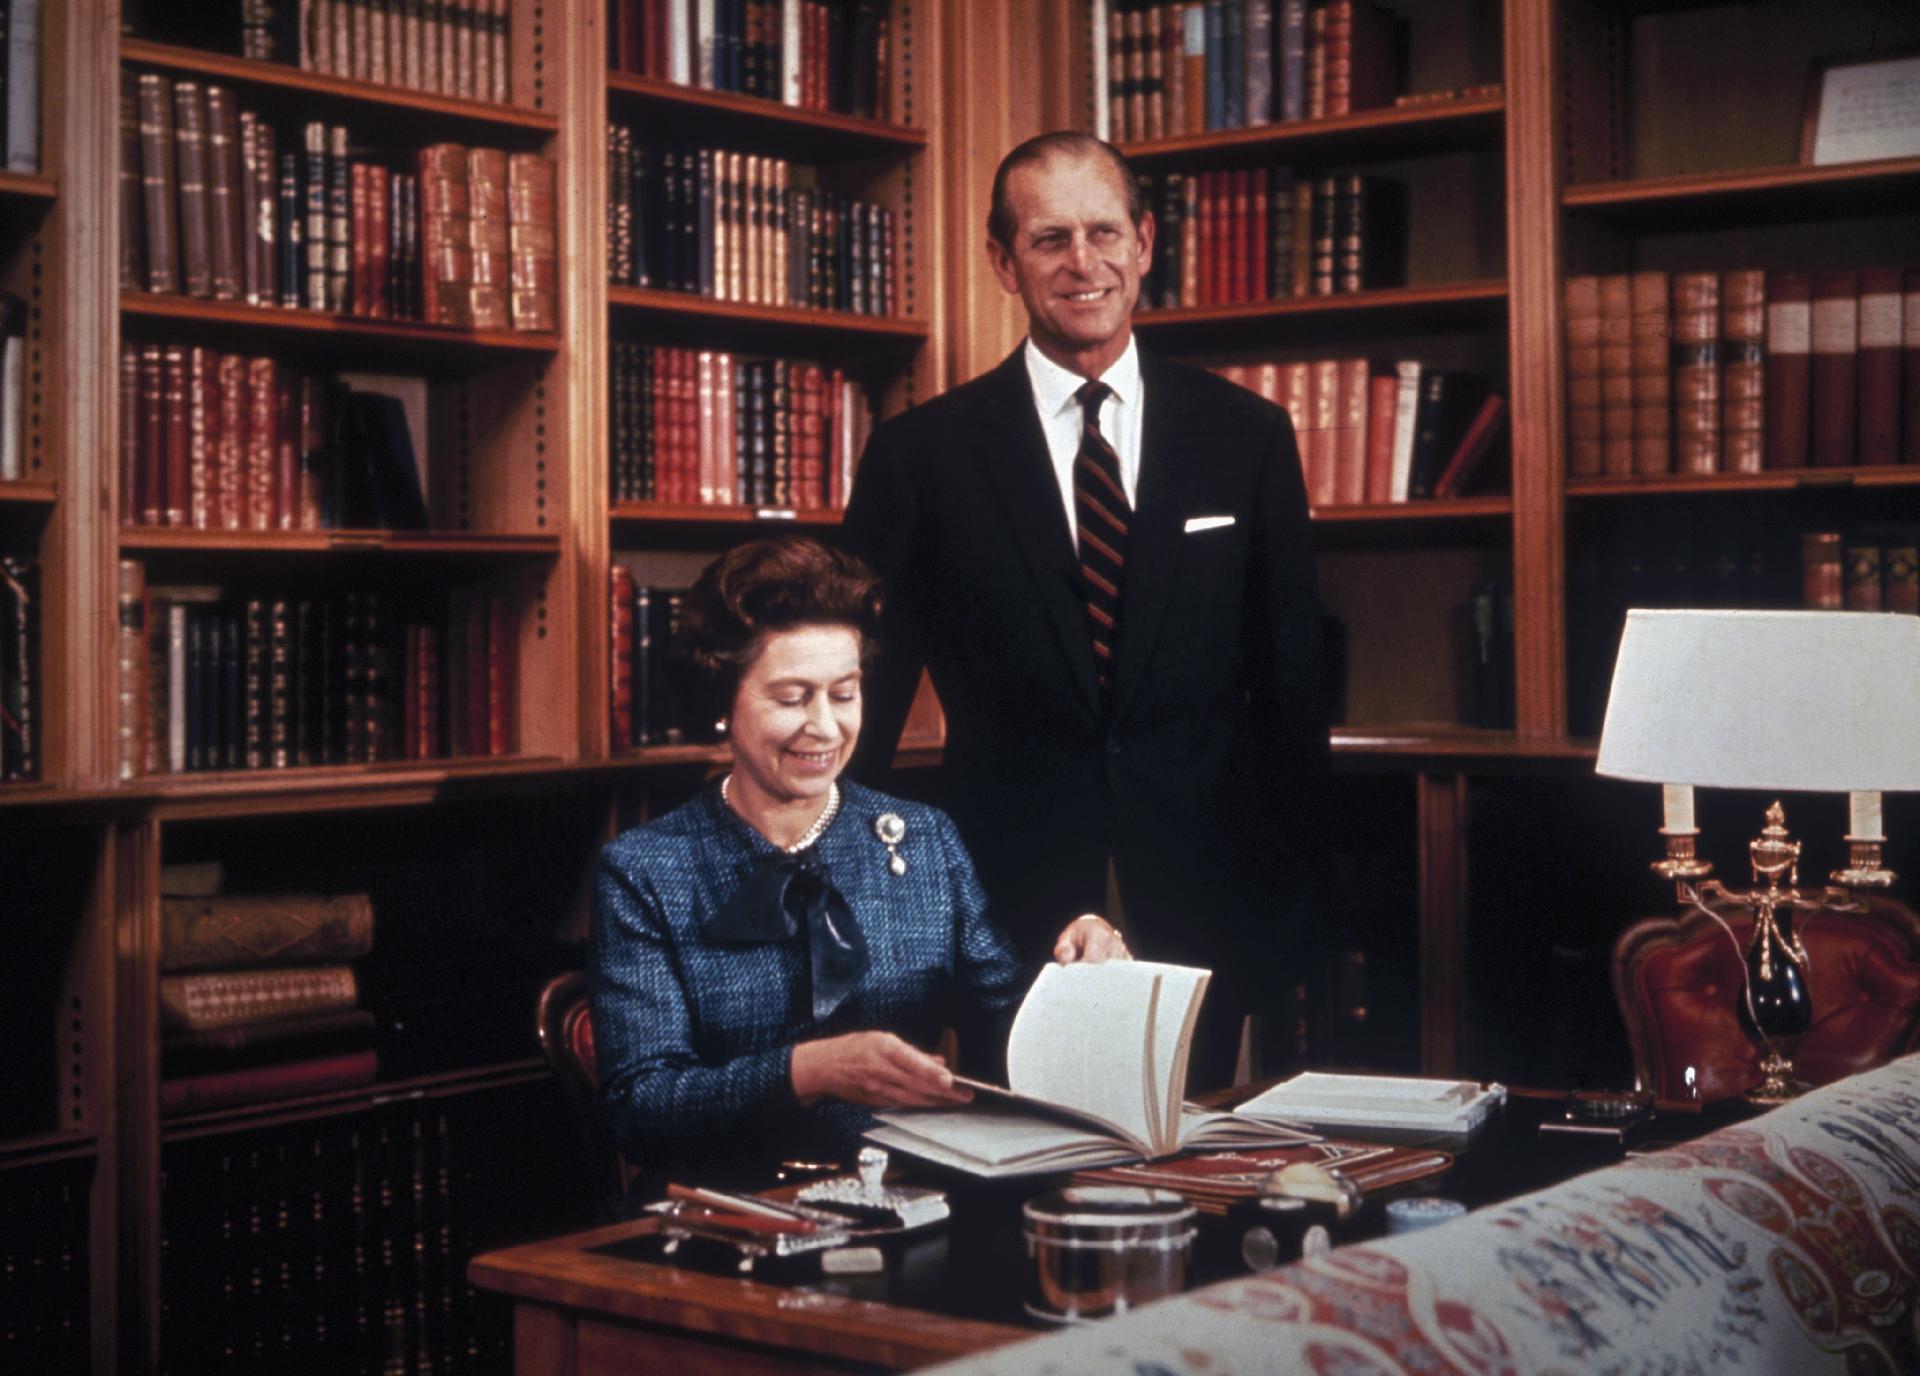 Queen Elizabeth II and Prince Phillip in a 1975 portrait - Getty Images